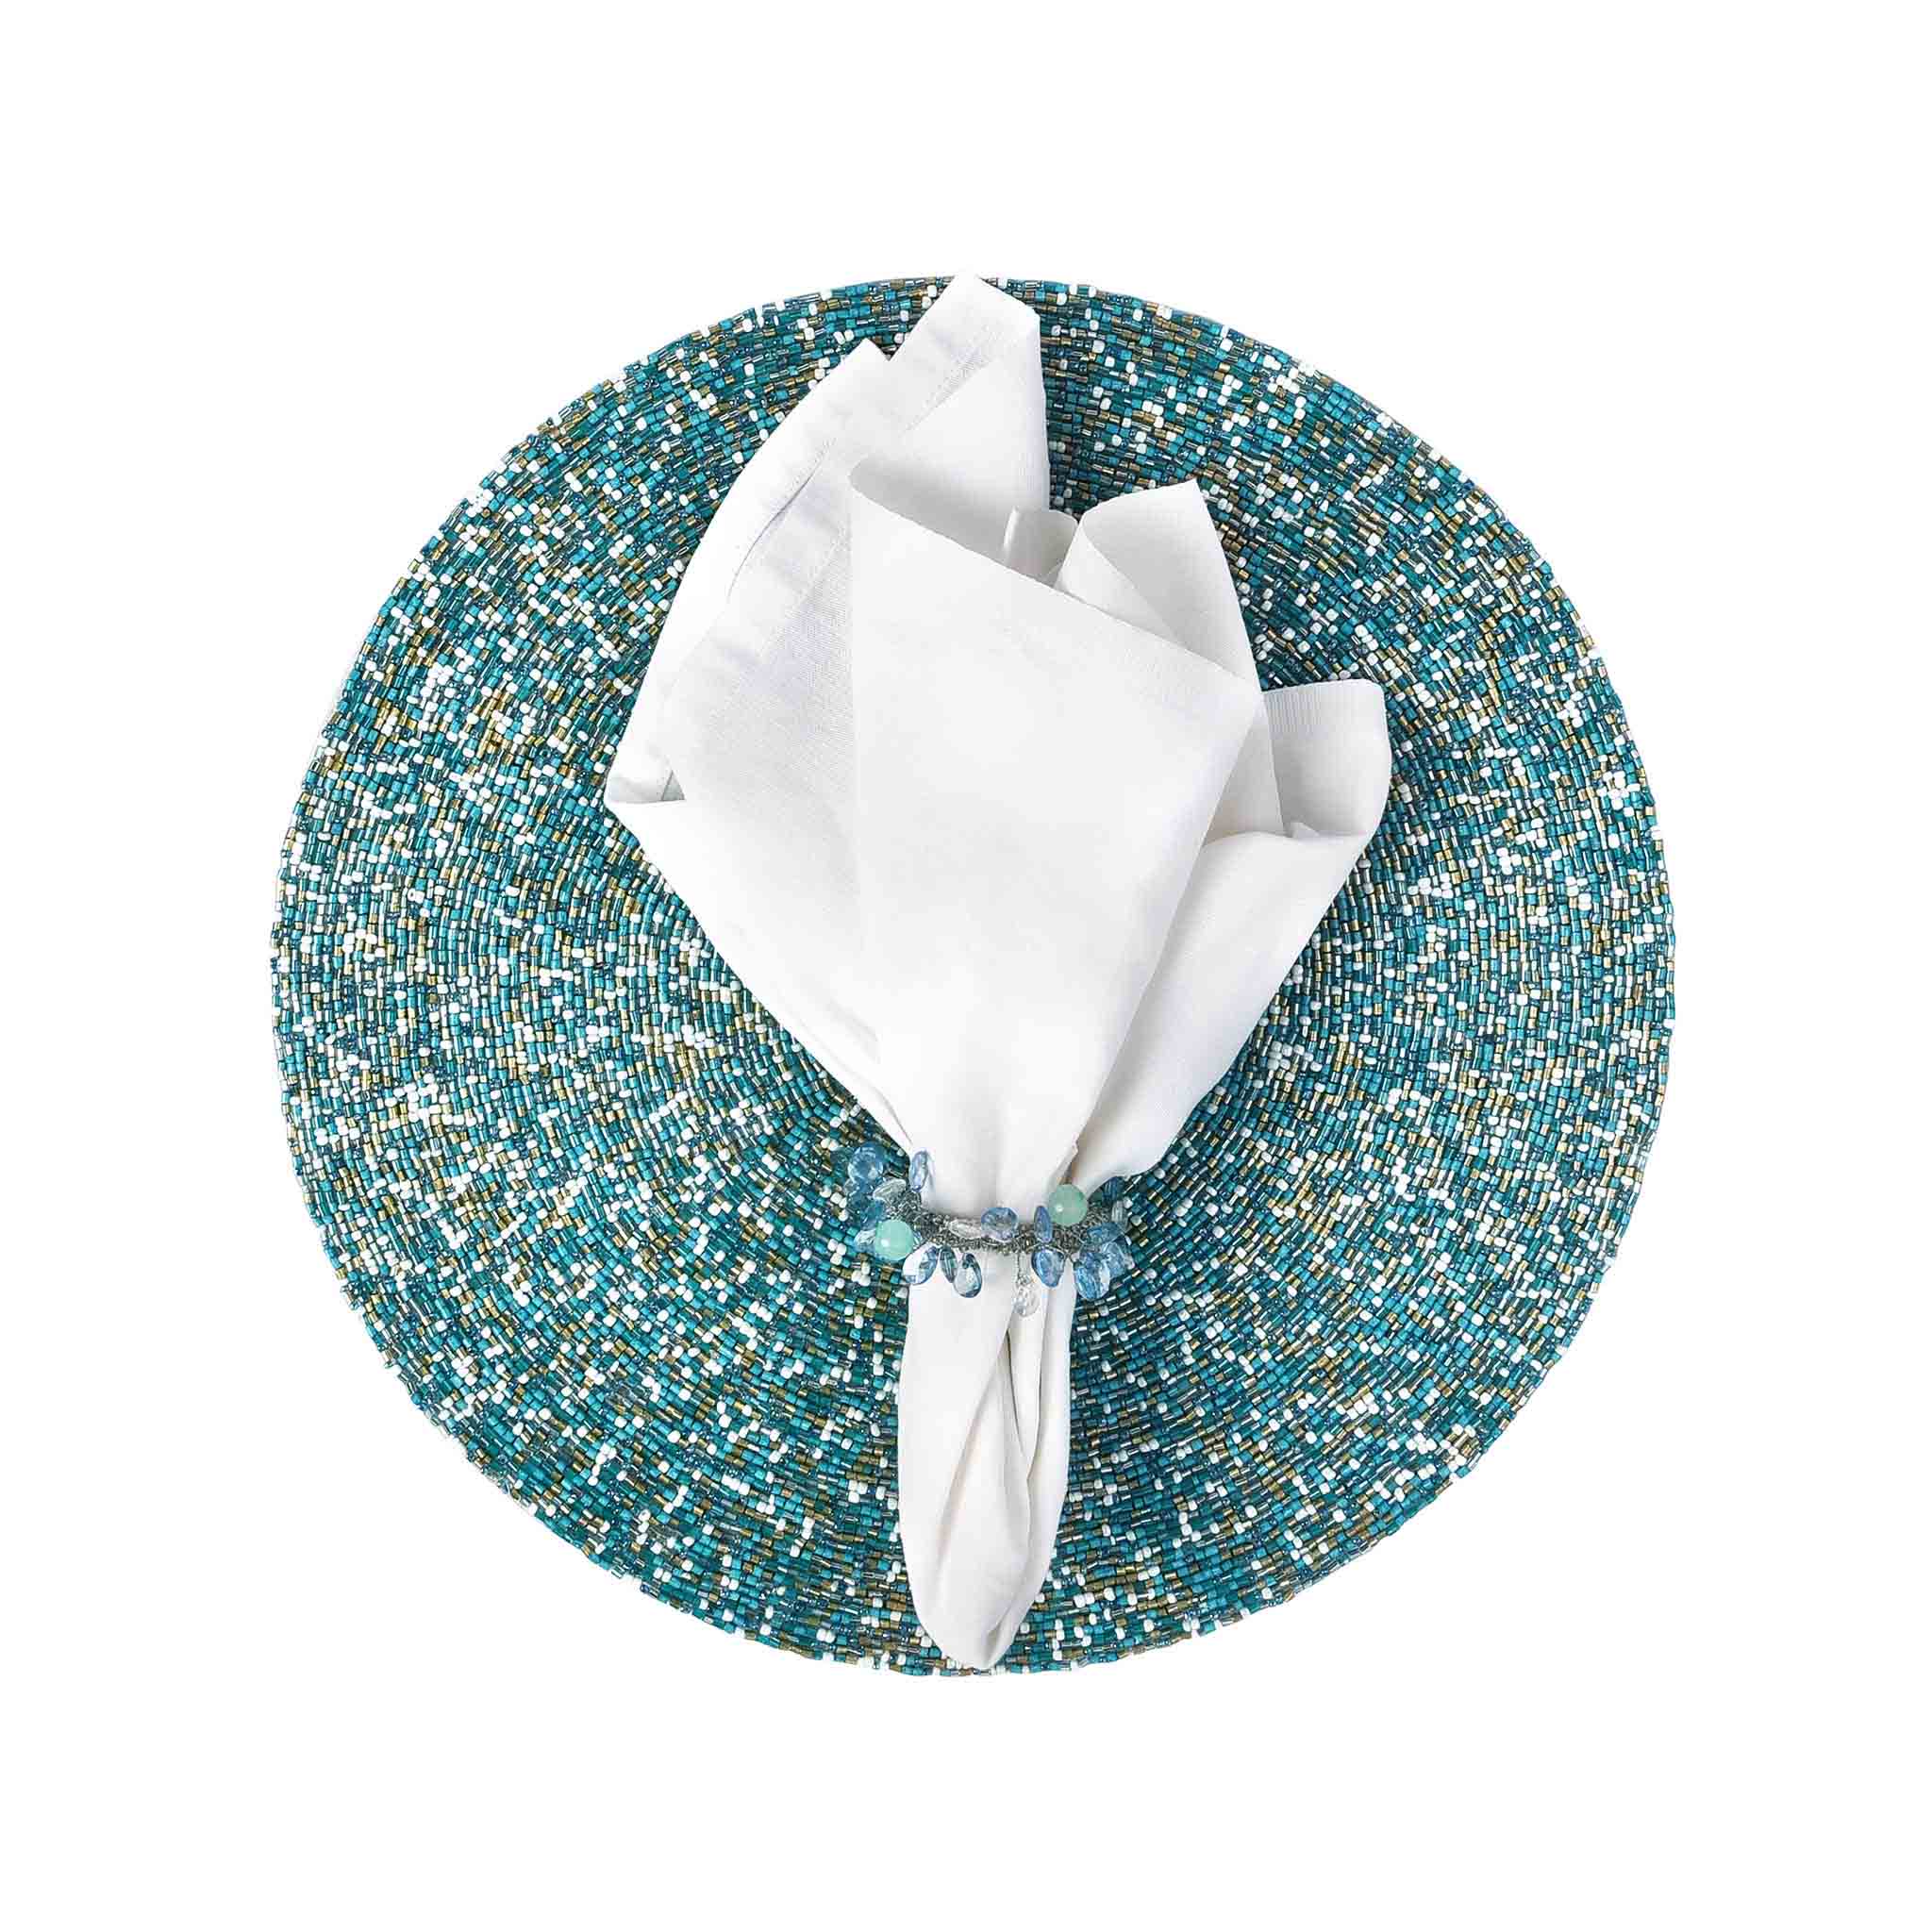 Embroidered Placemat in Teal & Silver, Set of 2/4